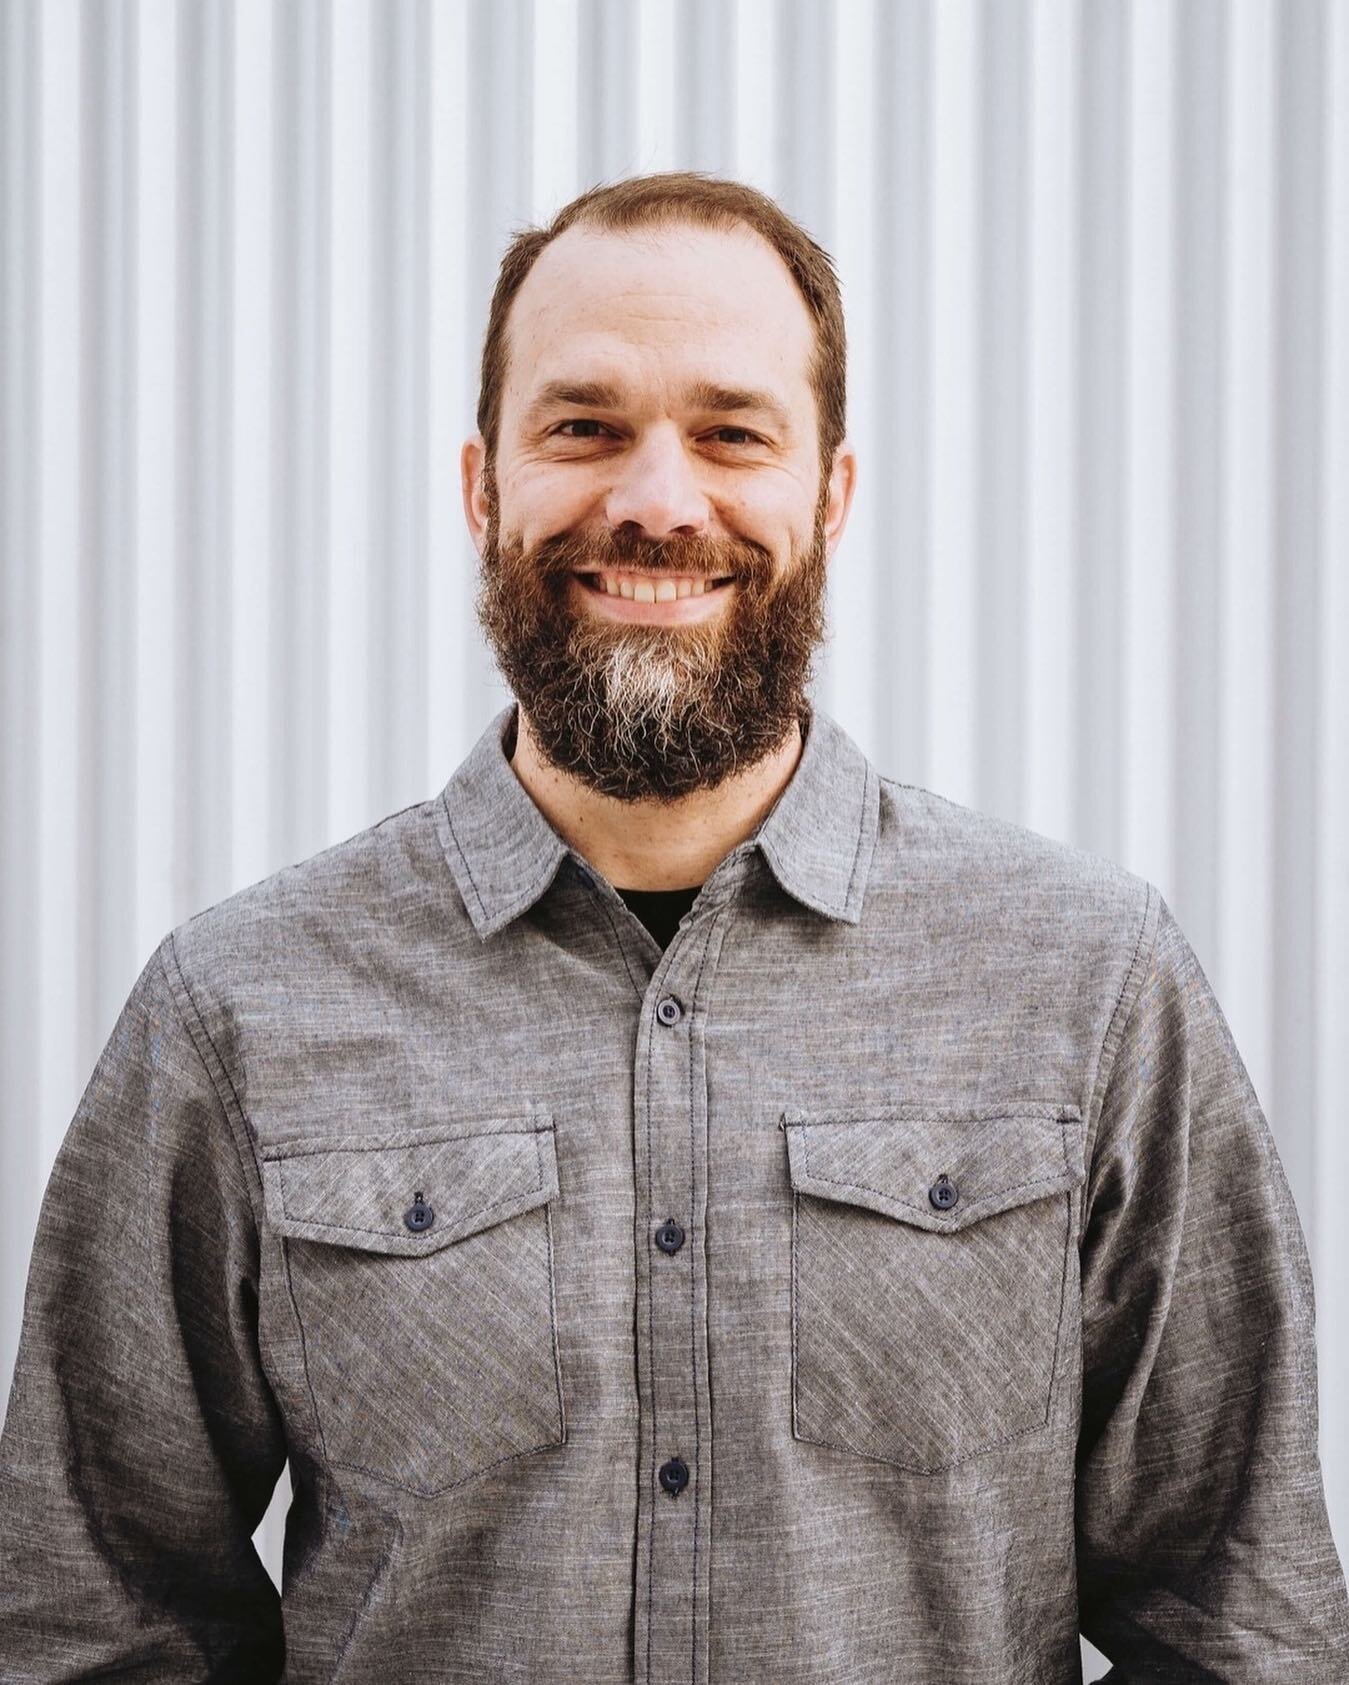 This is Adam - Tank&rsquo;s dad, a.k.a our new Director of Business Development! We are so excited that Adam has joined our team. He will be such a great addition and we can&rsquo;t wait for you all to meet him.... and Tank.
.
.
.
#dadlife #vinylshop